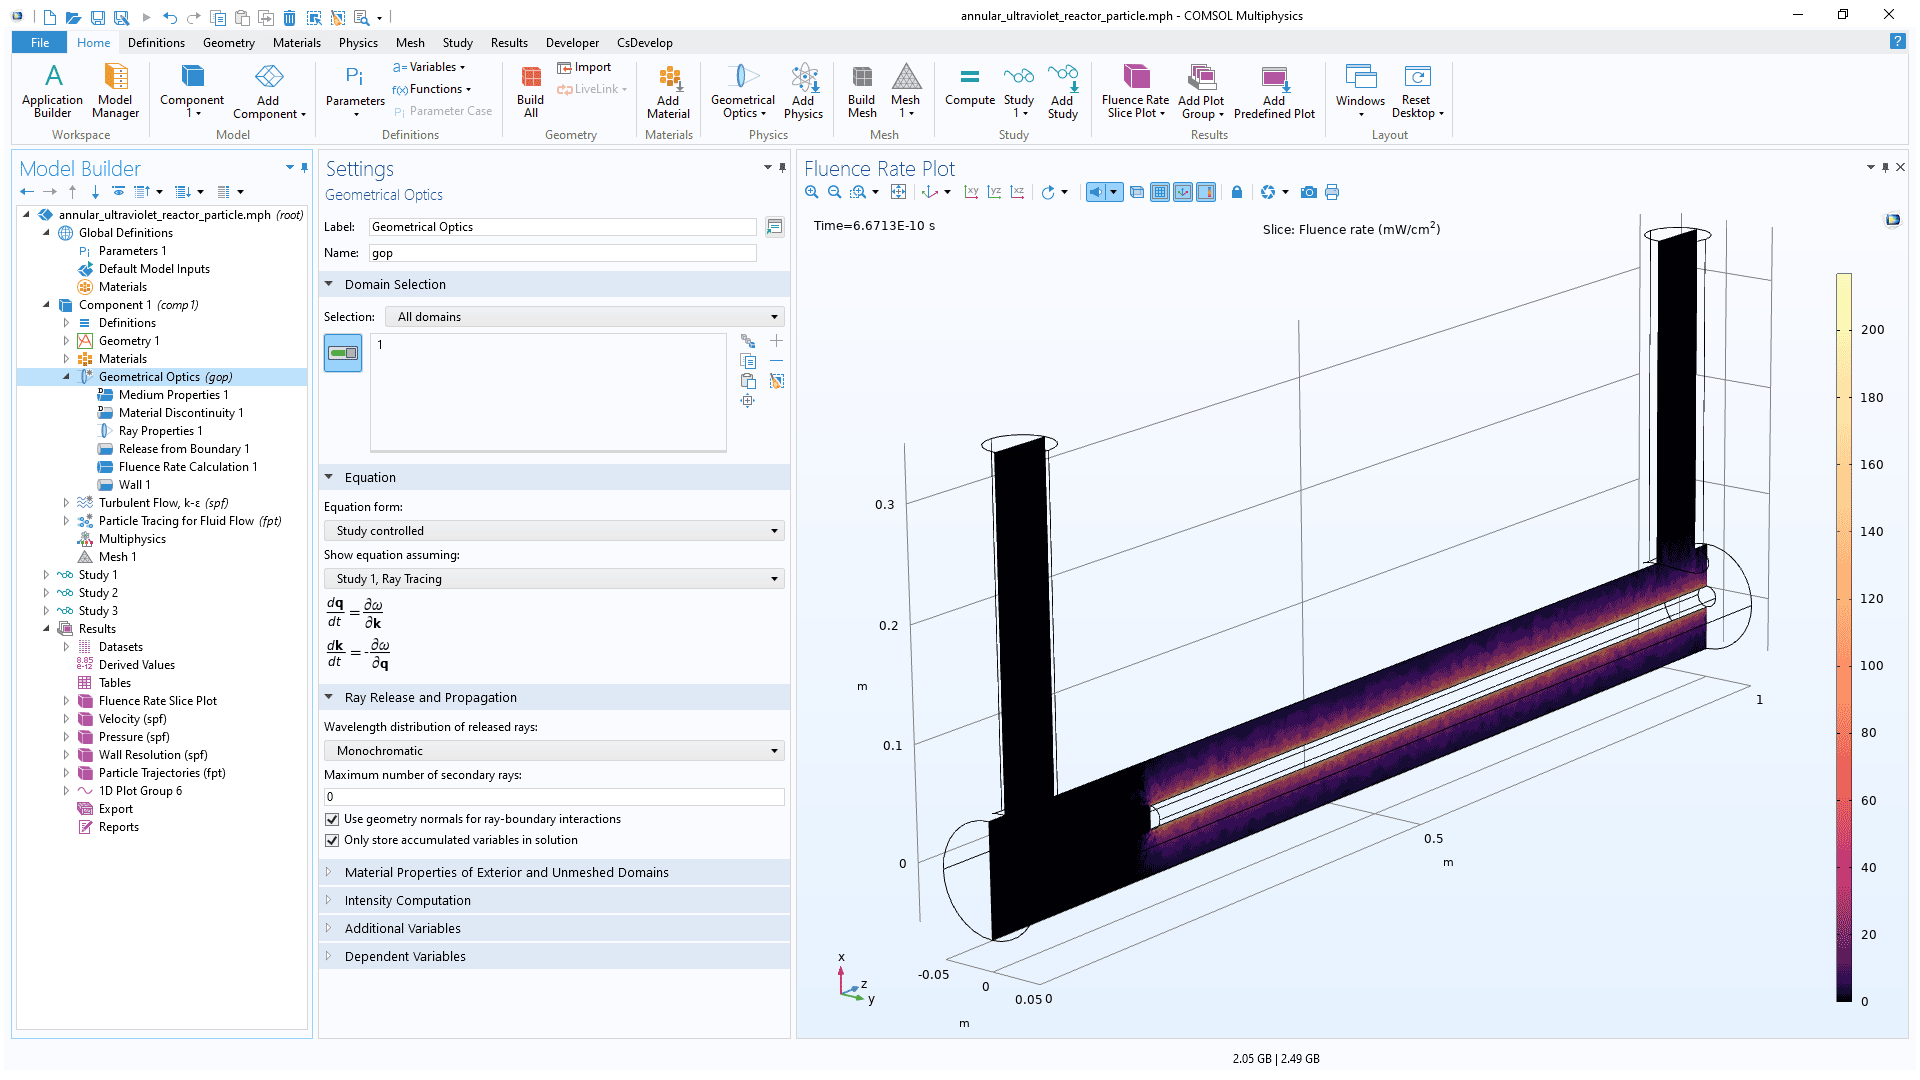 The COMSOL Multiphysics UI showing the Model Builder with the Geometrical Optics node highlighted, the corresponding Settings window, and a reactor model in the Graphics window.